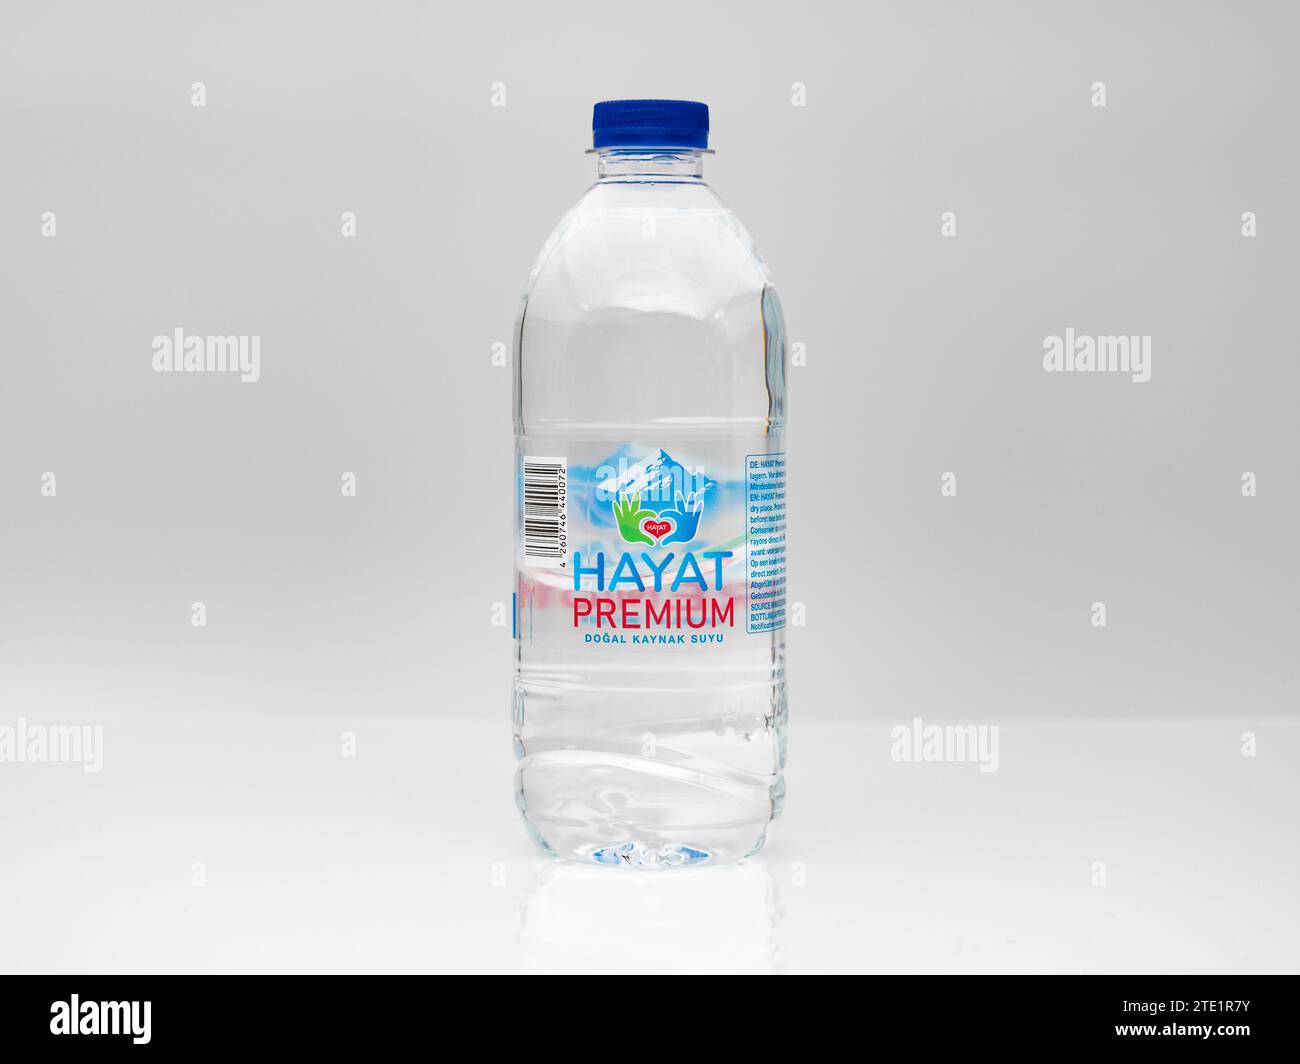 https://c8.alamy.com/comp/2TE1R7Y/hayat-premium-water-in-a-bottle-it-is-extracted-and-bottled-from-a-source-in-macedonia-the-disposable-plastic-product-is-standing-in-a-studio-2TE1R7Y.jpg